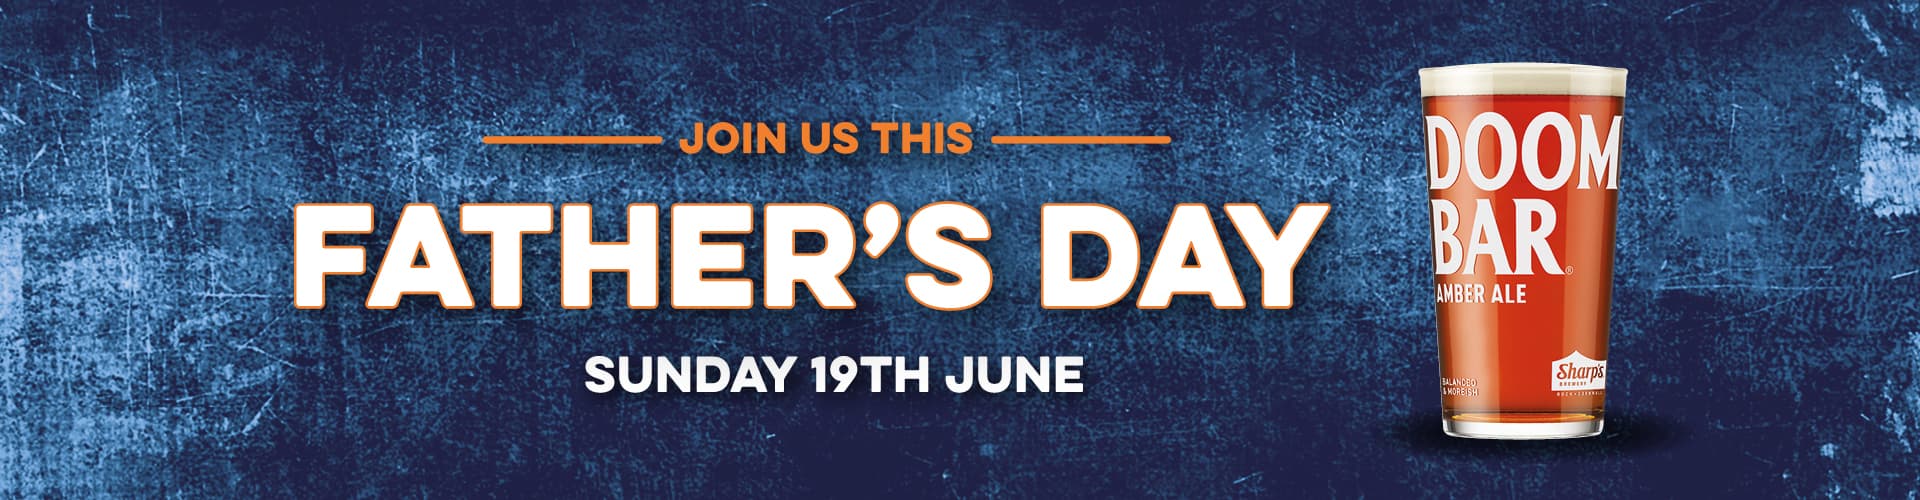 Father's Day at The Black Hat pub in Ilkley